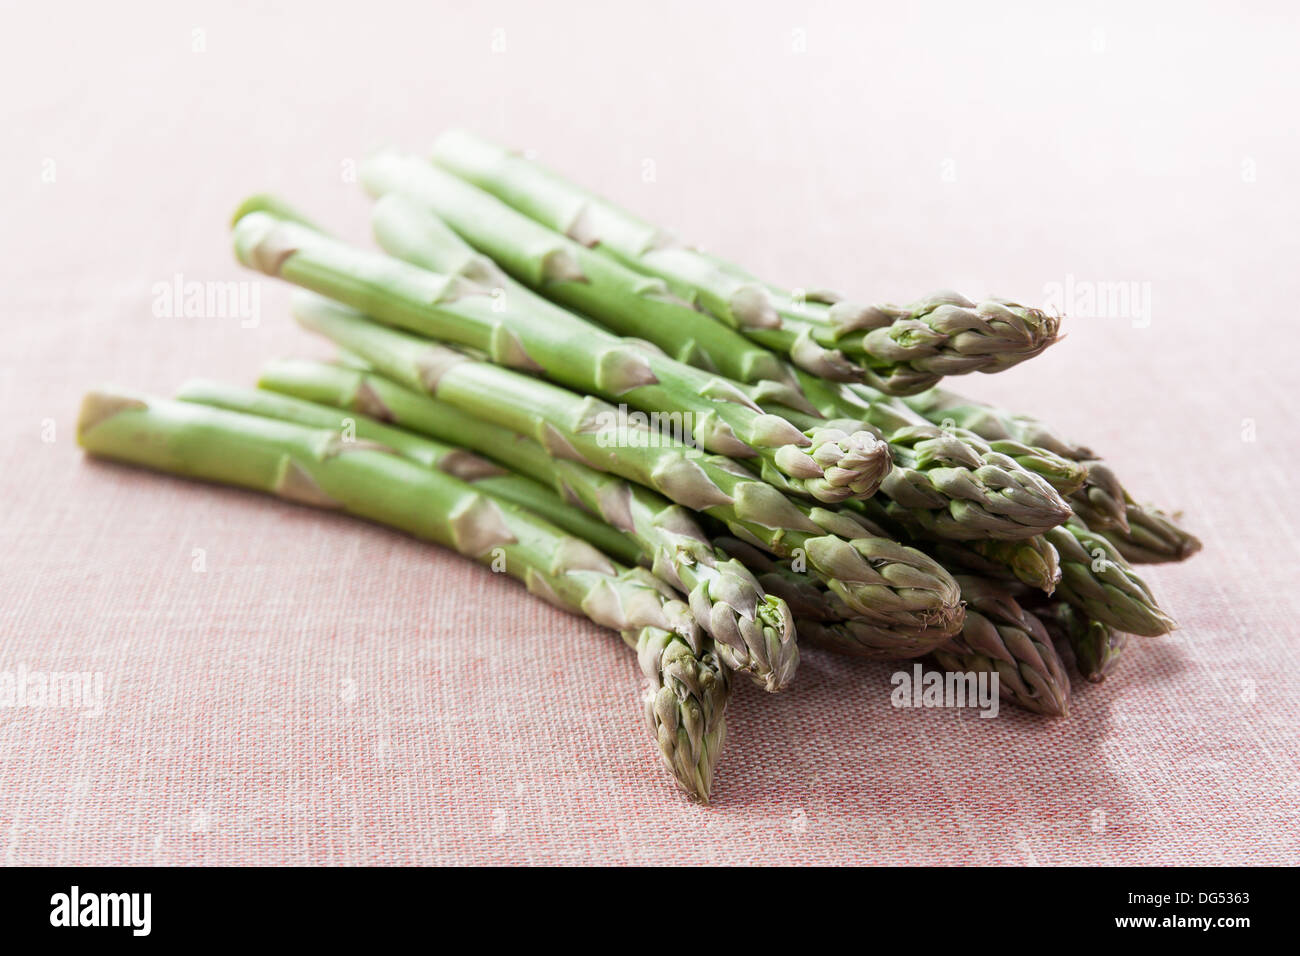 Bunch of green asparagus on red fabric Stock Photo